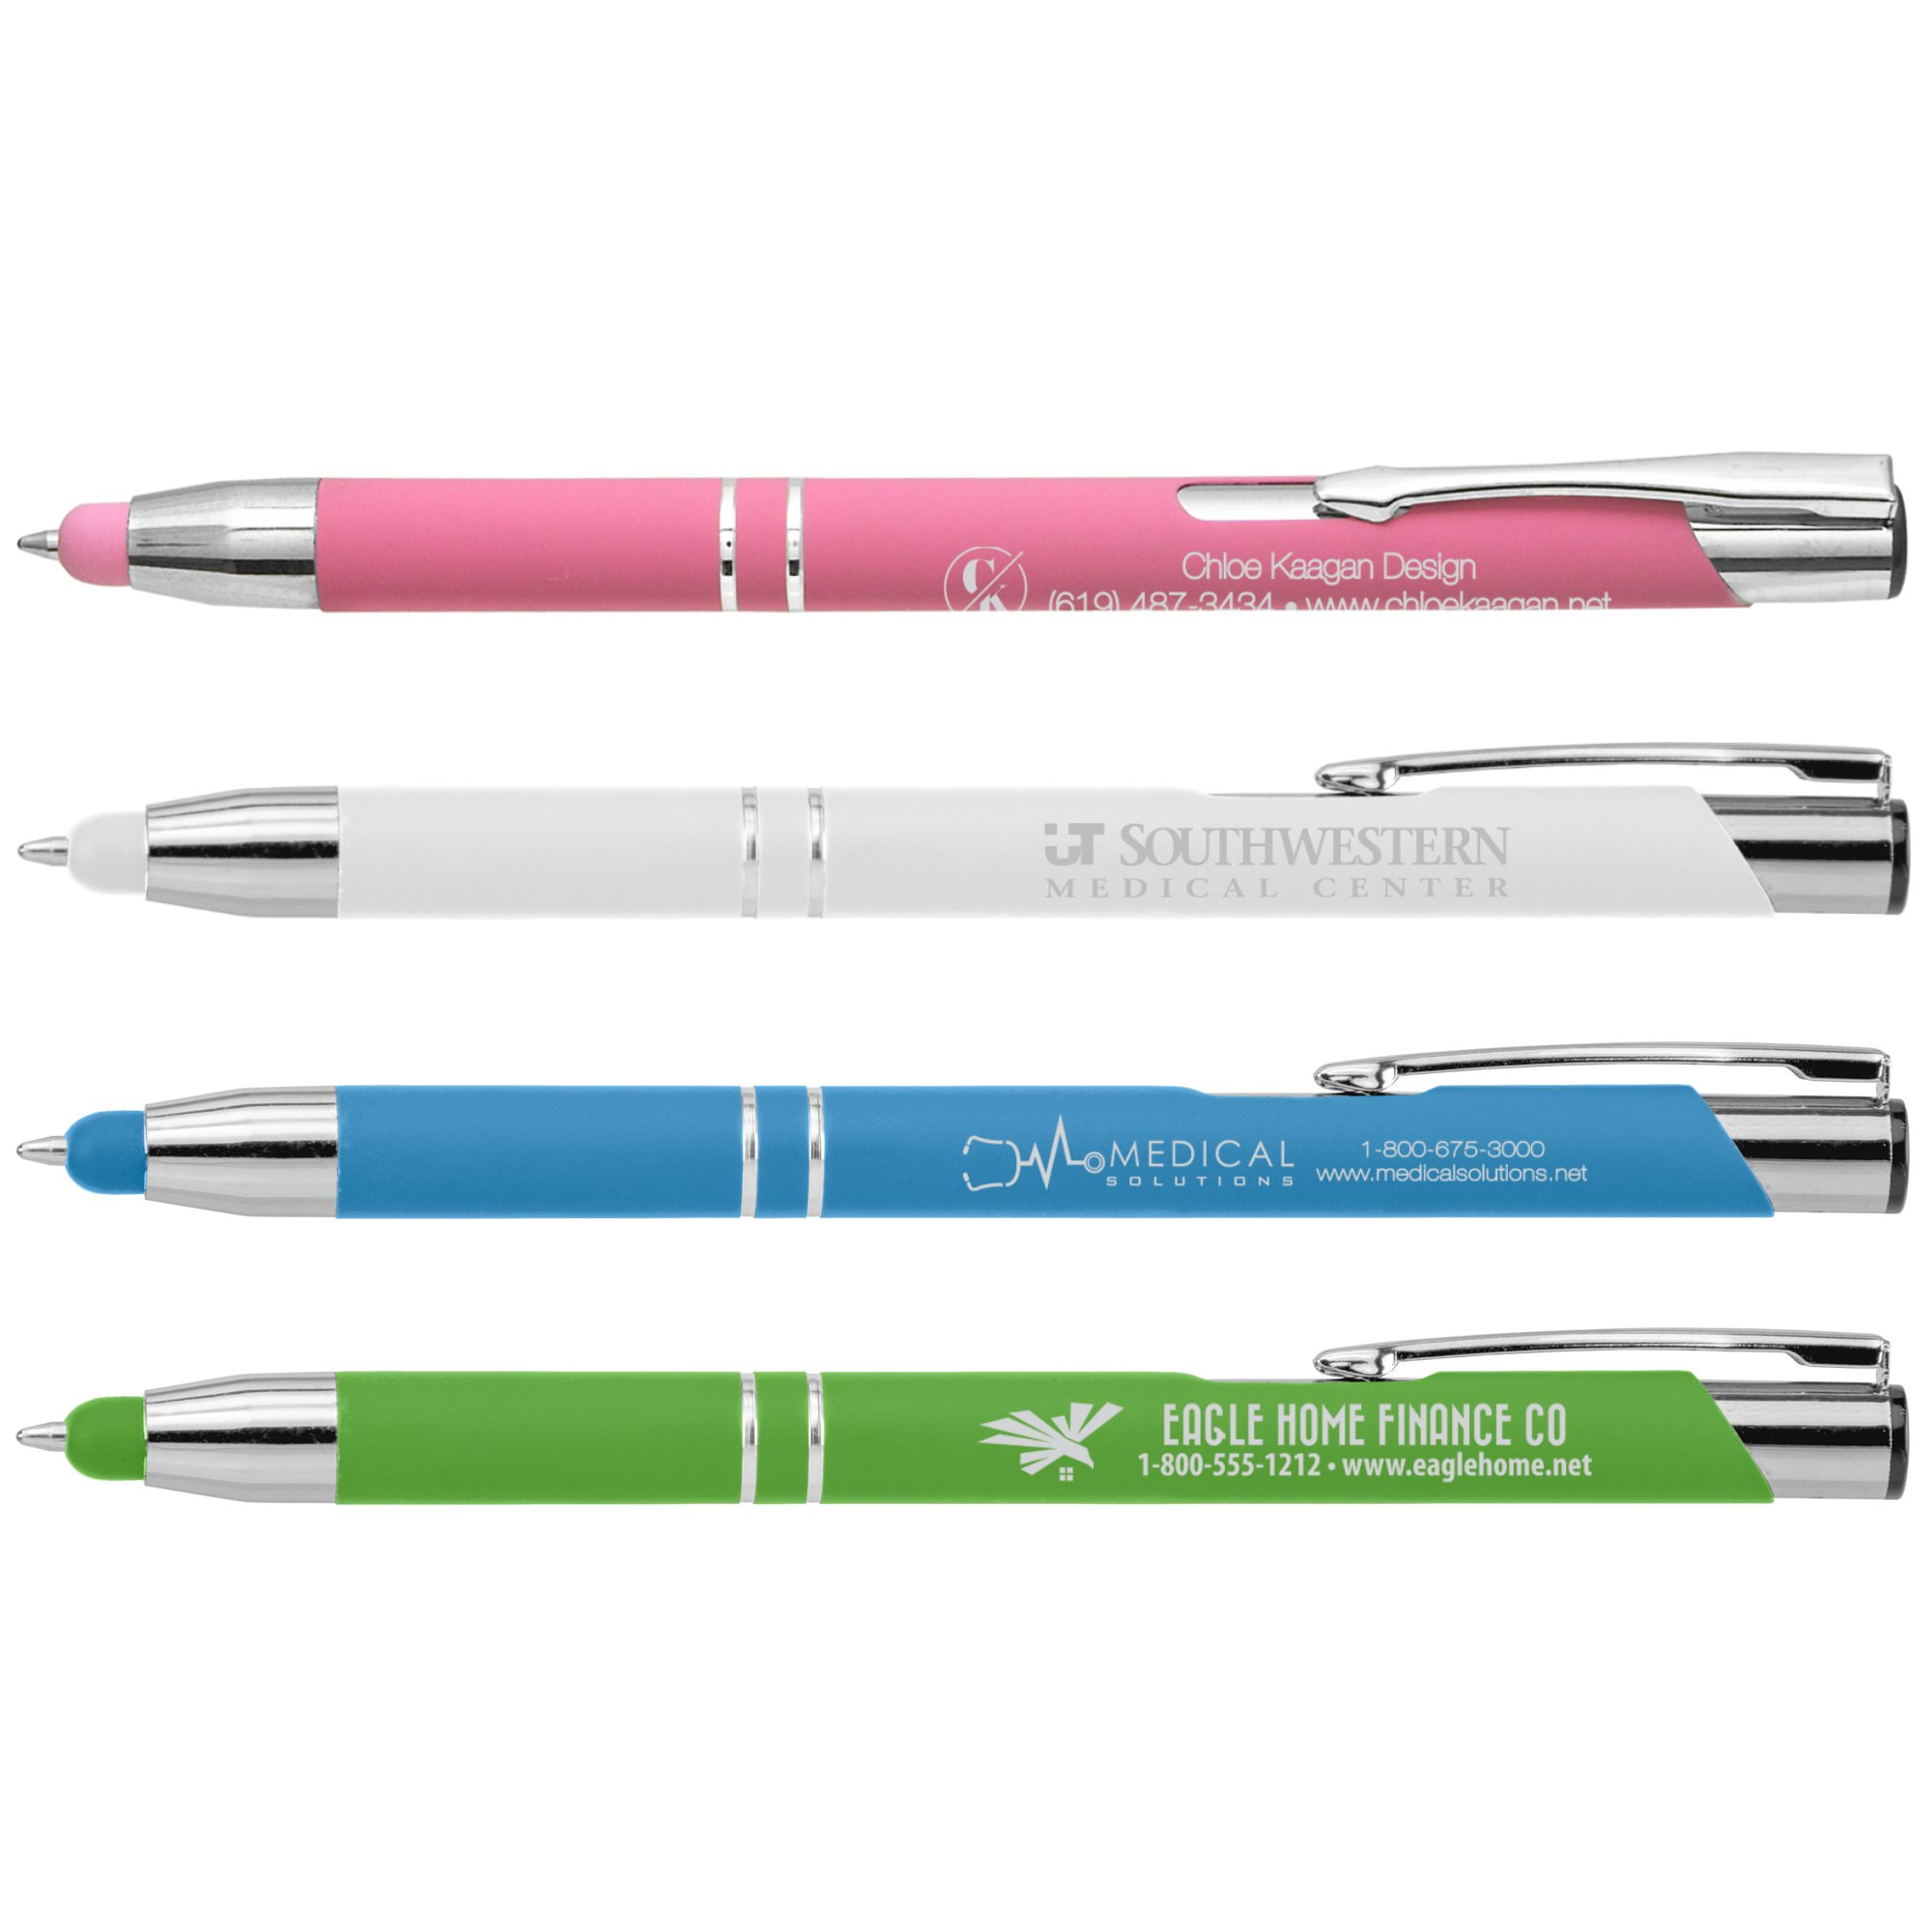 Mini Pen  Branded Promotional Items and Cool Gadgets (Sunshine Products  USA)